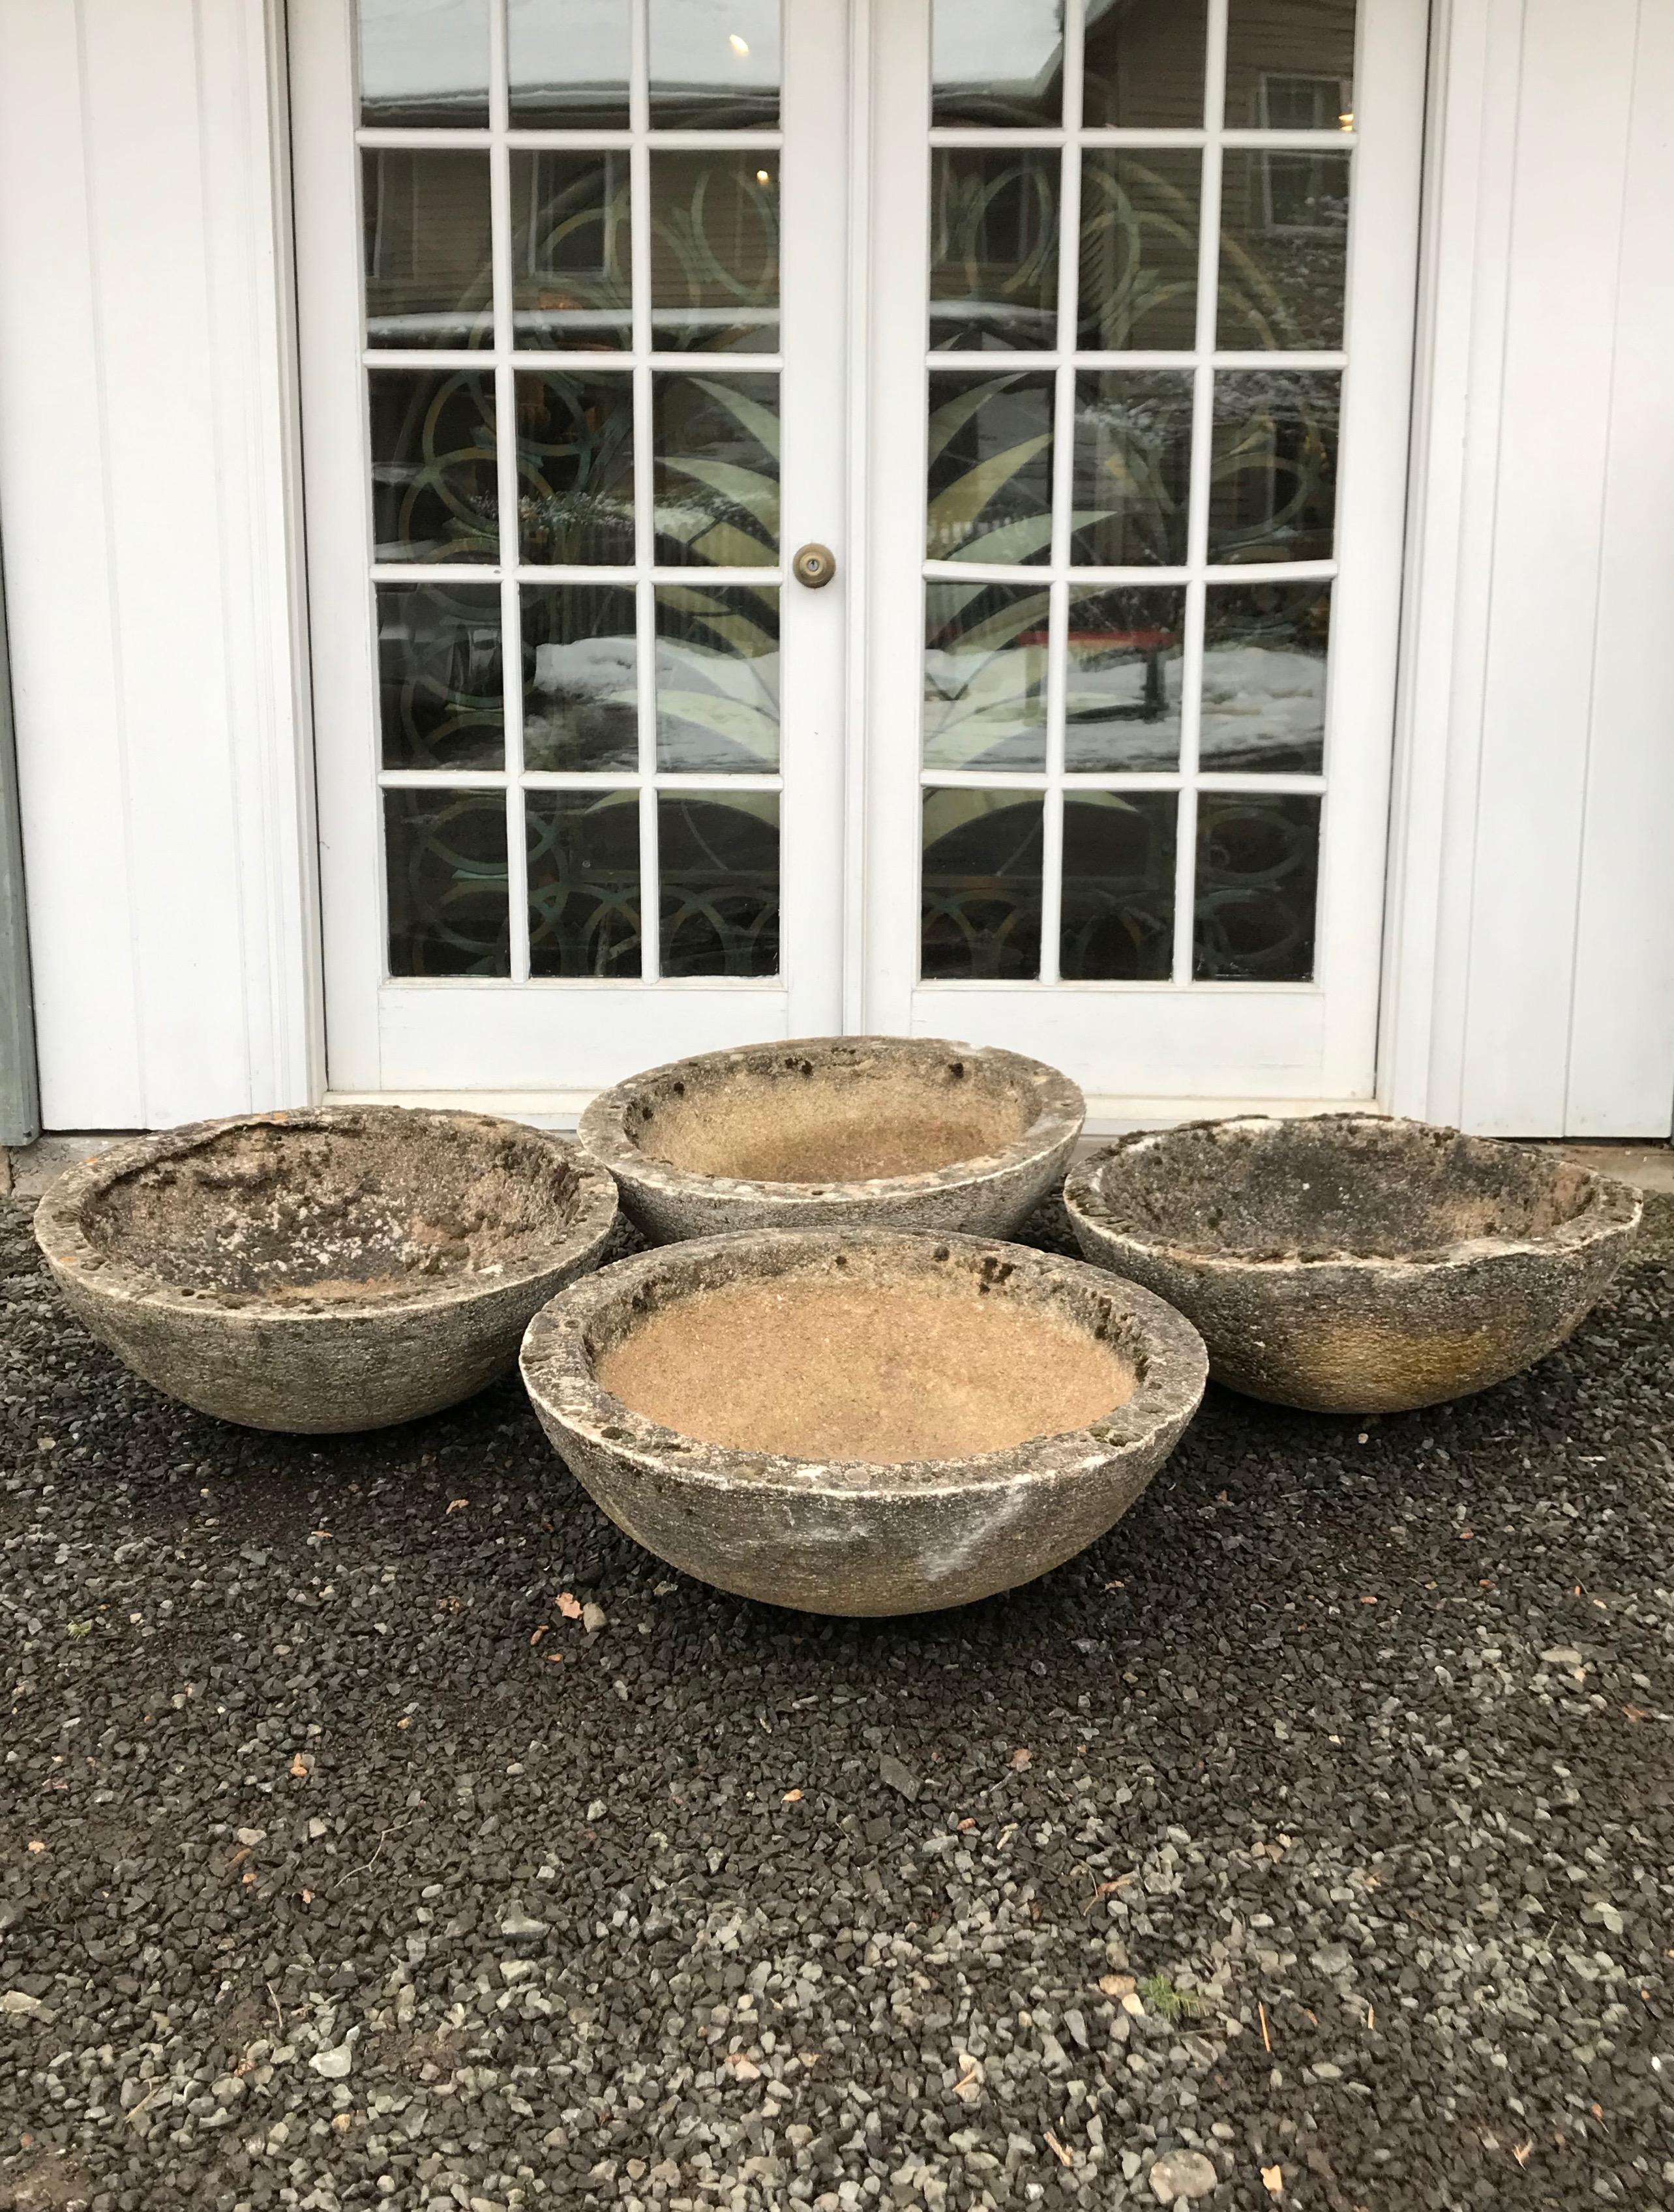 These bowl planters are of a good size and have deep planting wells and an excellent patina. We love how they blend into the landscape and their size and shape makes them quite versatile. One of the four has multiple losses to the rim, but if potted